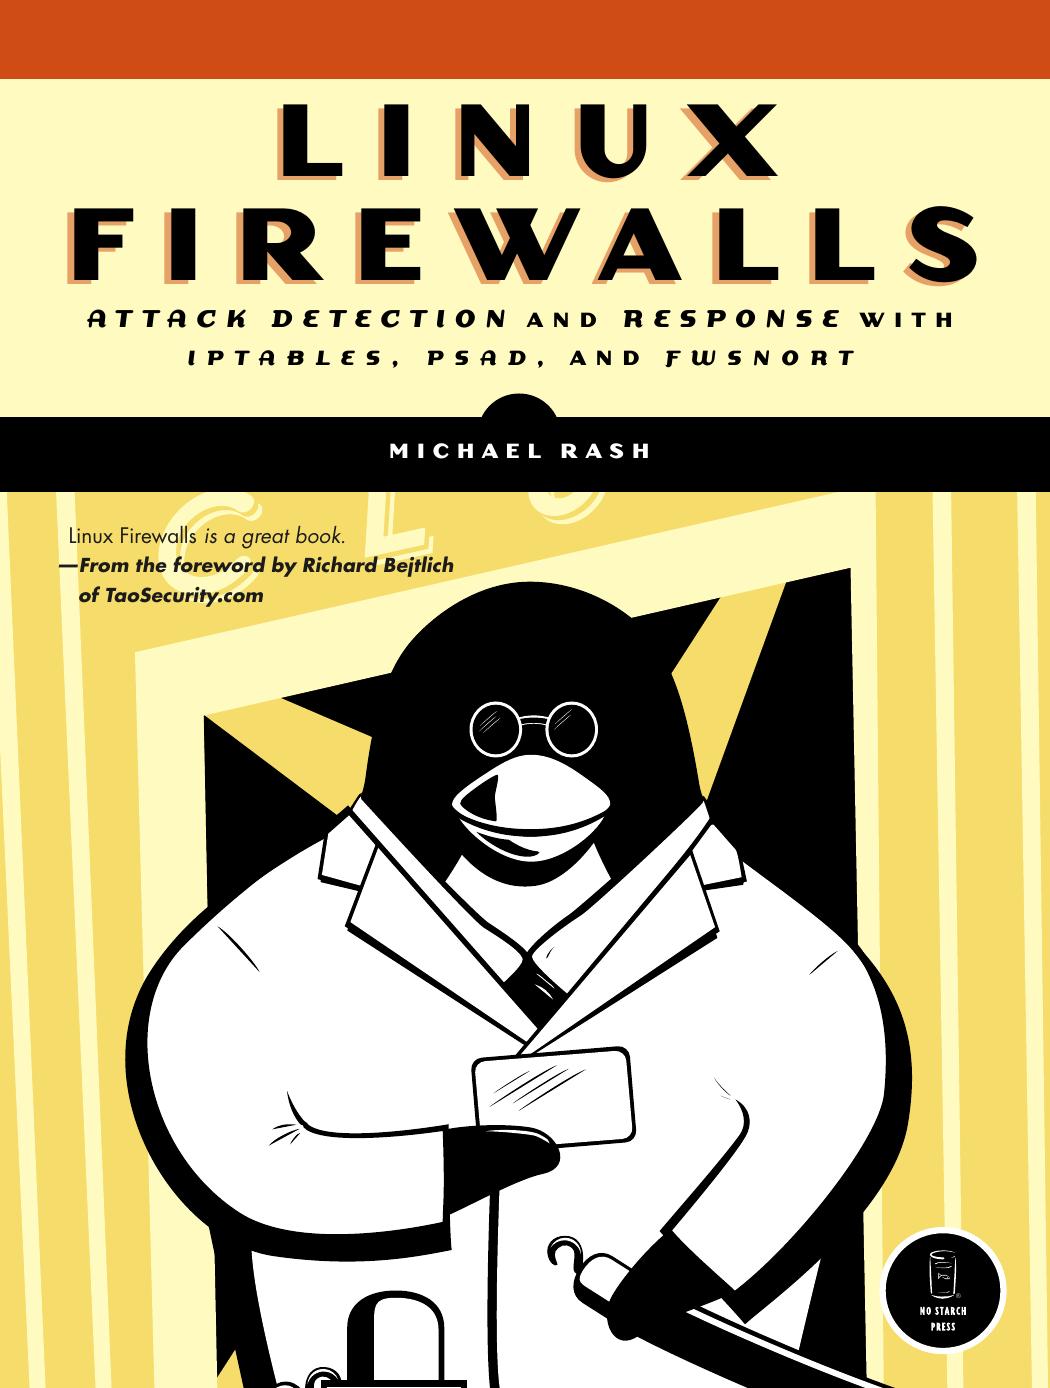 Linux Firewalls: Attack Detection and Response with iptables, psad, and fwsnort by Michael Rash